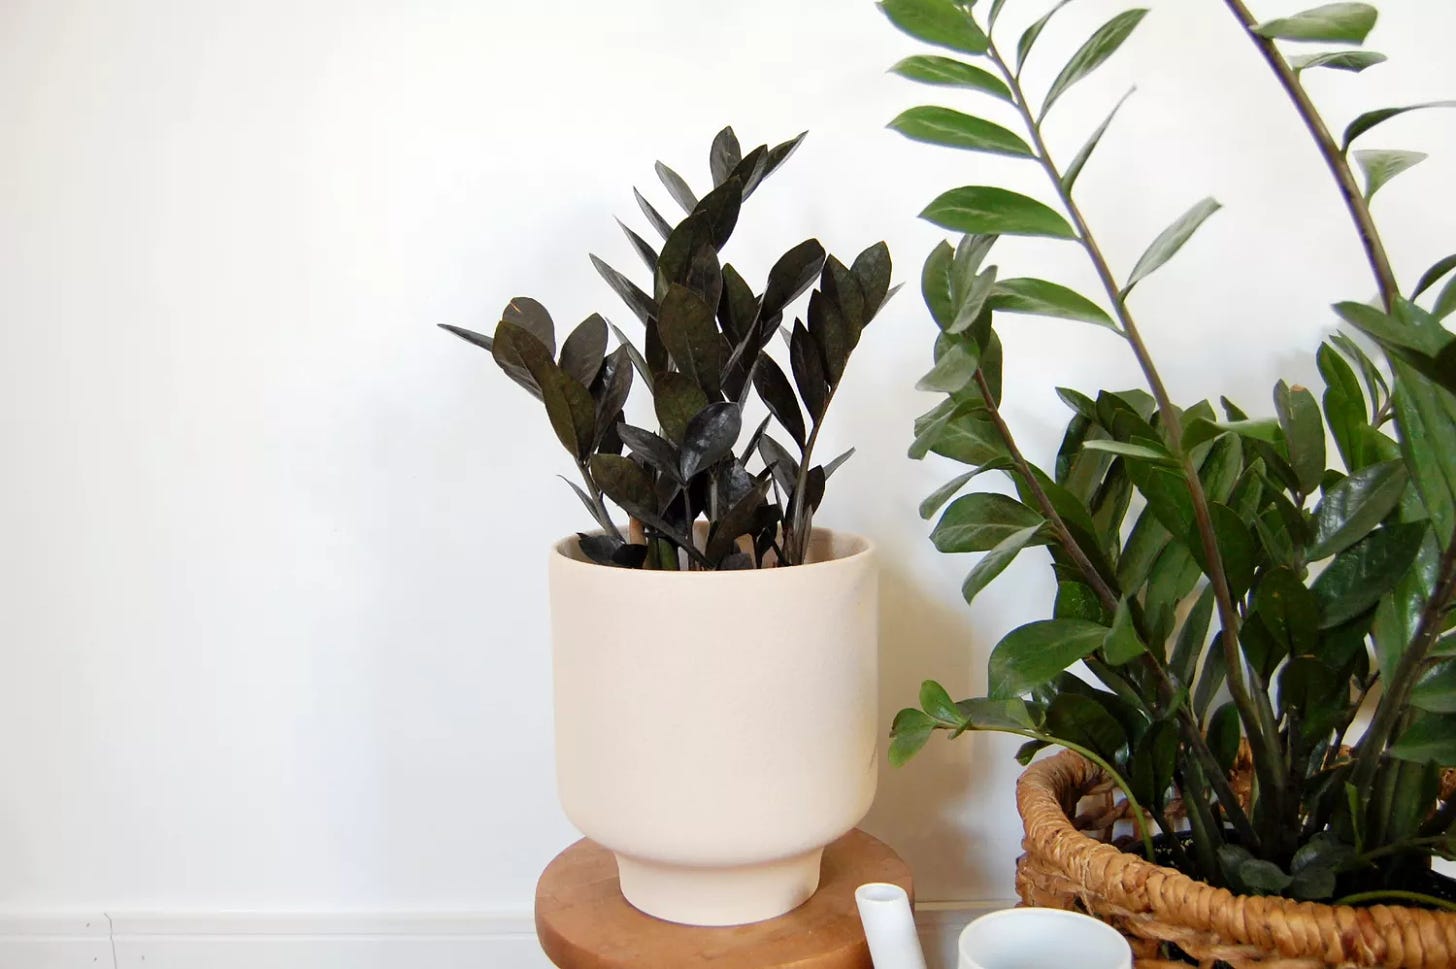 A small raven ZZ plant in a cream-colored pot sits on a wooden stool next to a large regular ZZ plant against a white wall.